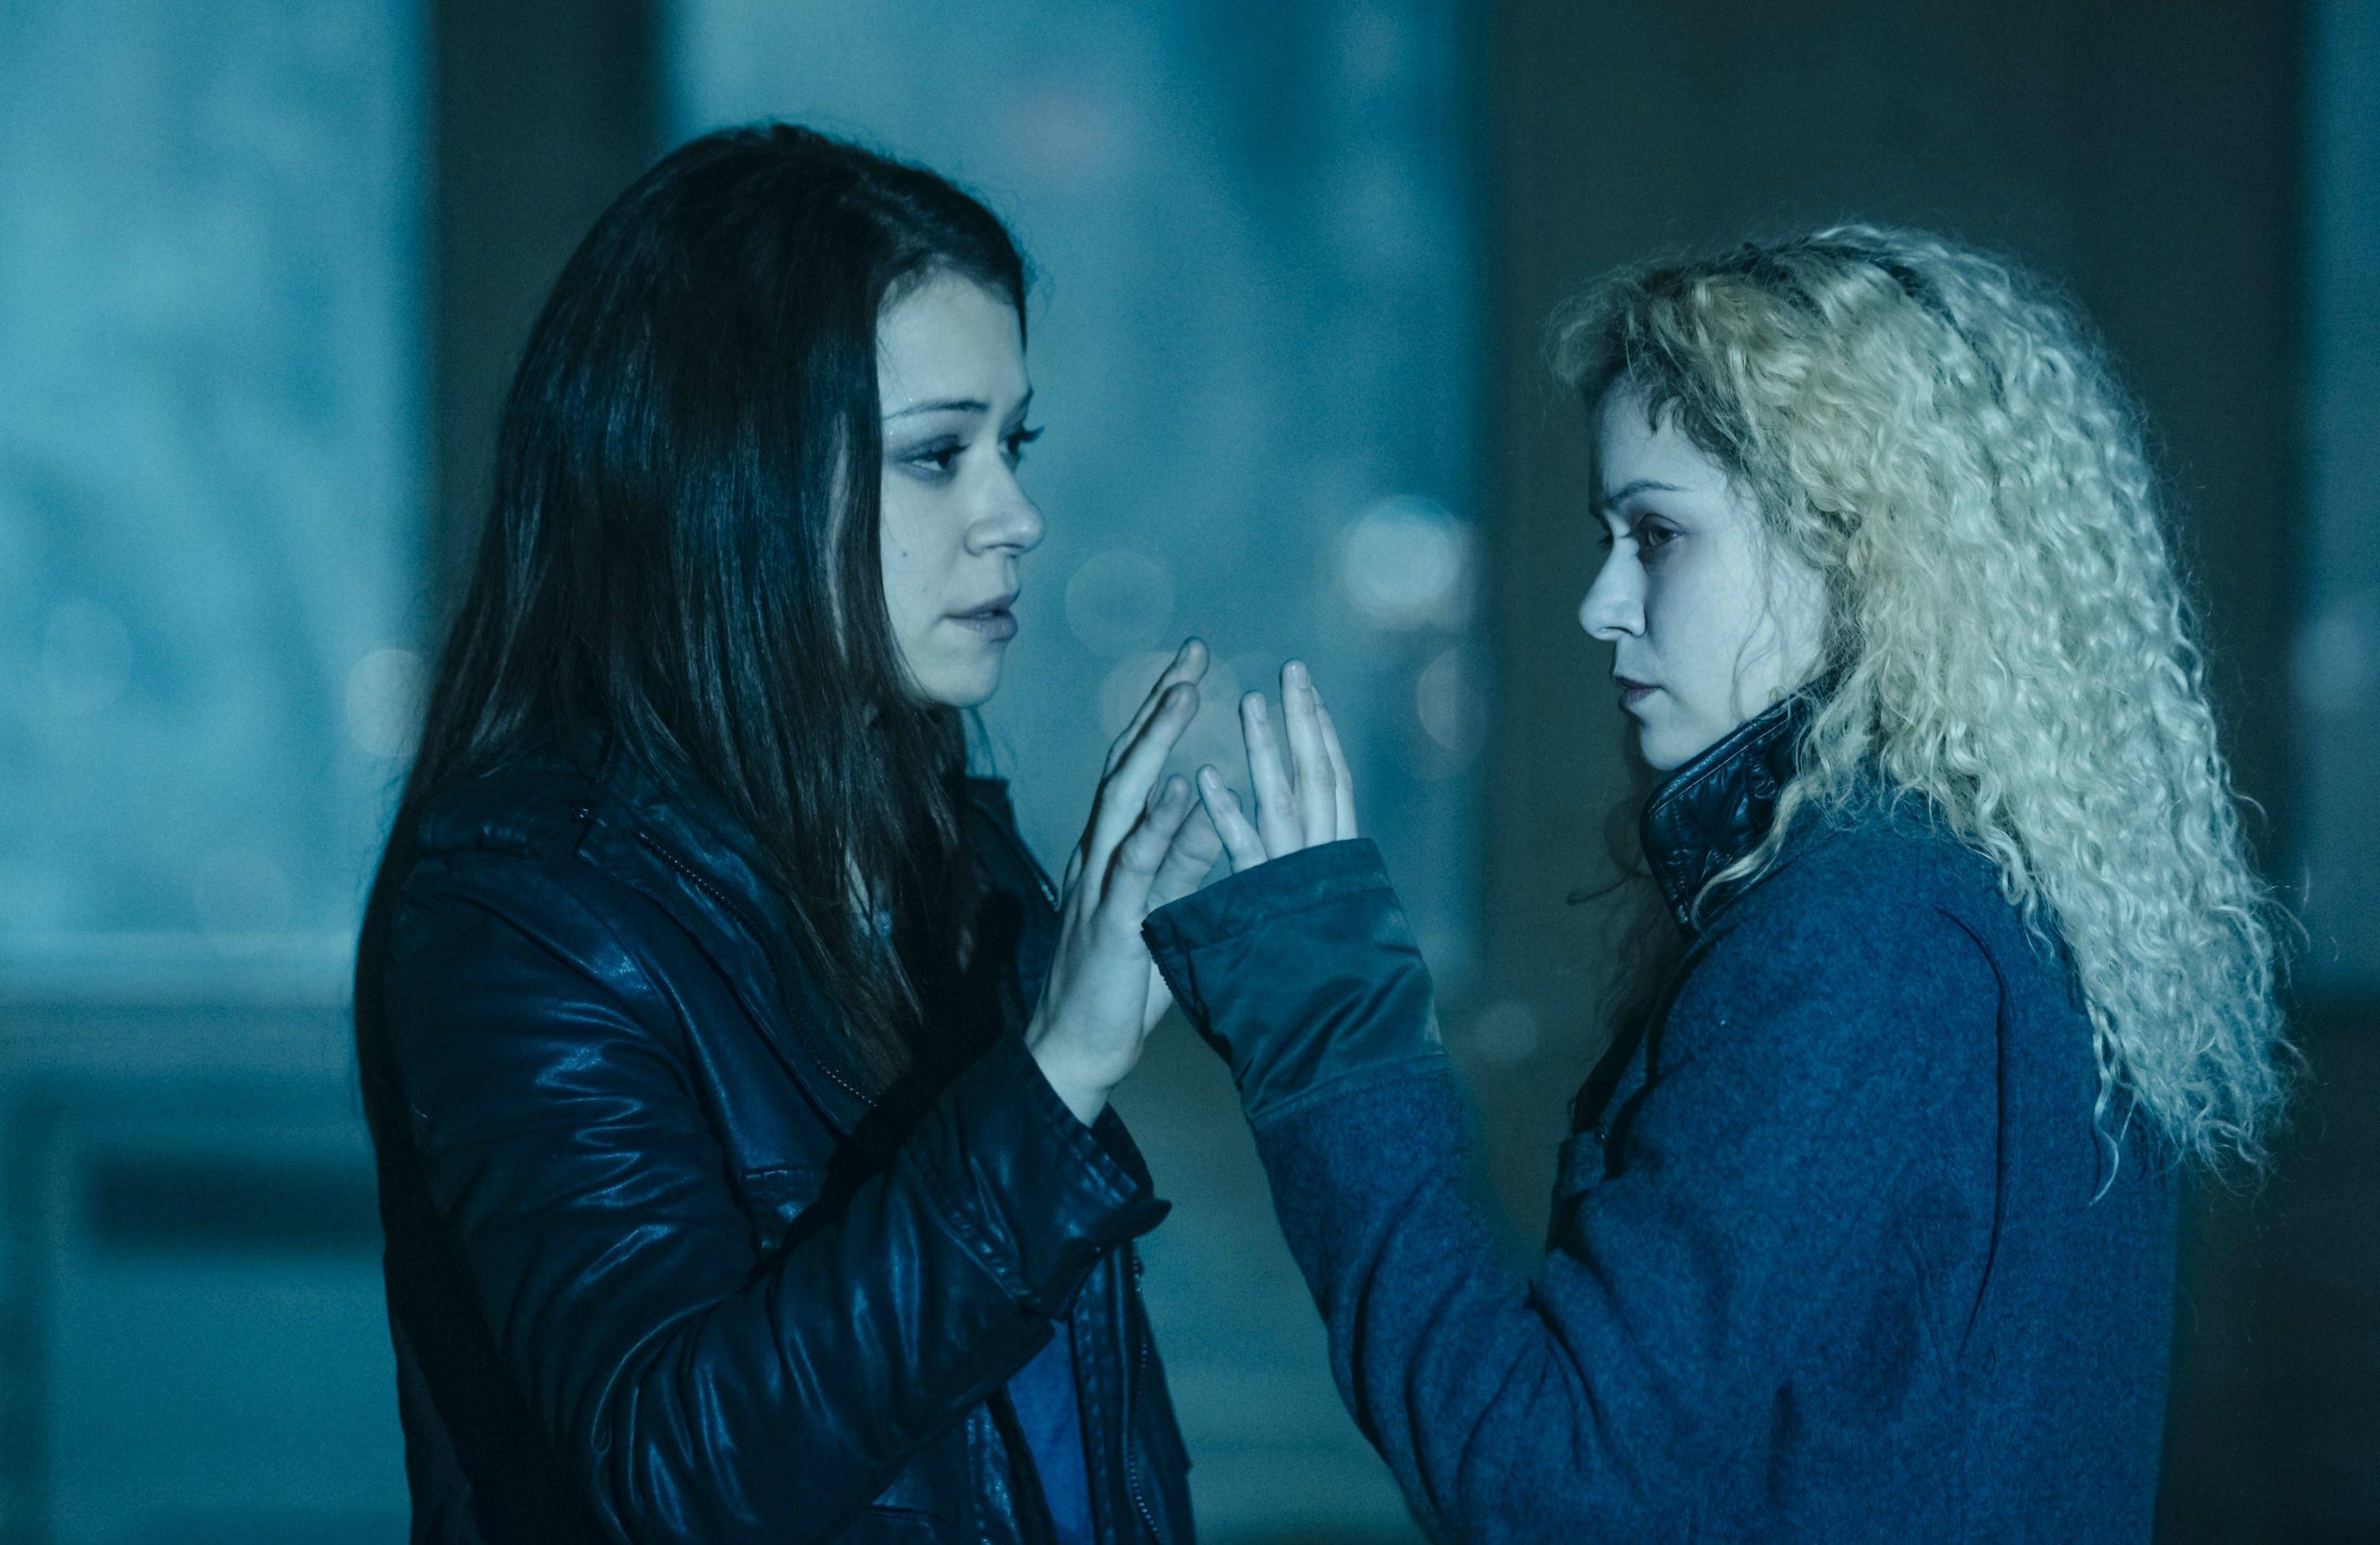 Orphan Black wallpaper. Anyone have some good ones? Here's